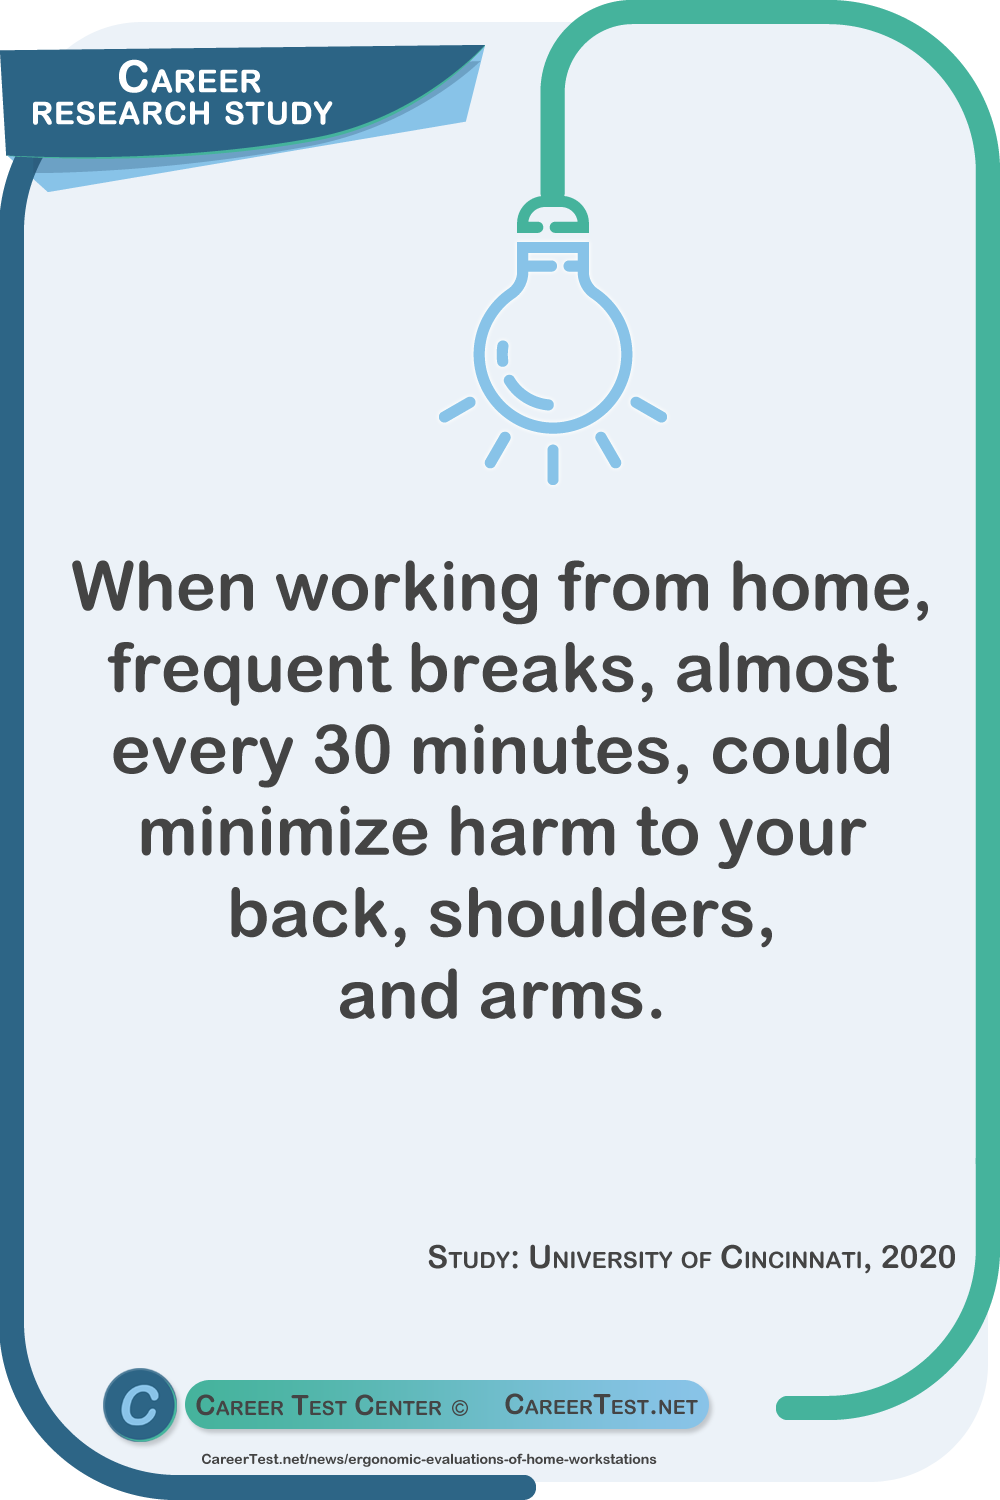 When working from home, frequent breaks, almost every 30 minutes, could minimize harm to your back, shoulders, and arms. Source: University of Cincinnati, 2020